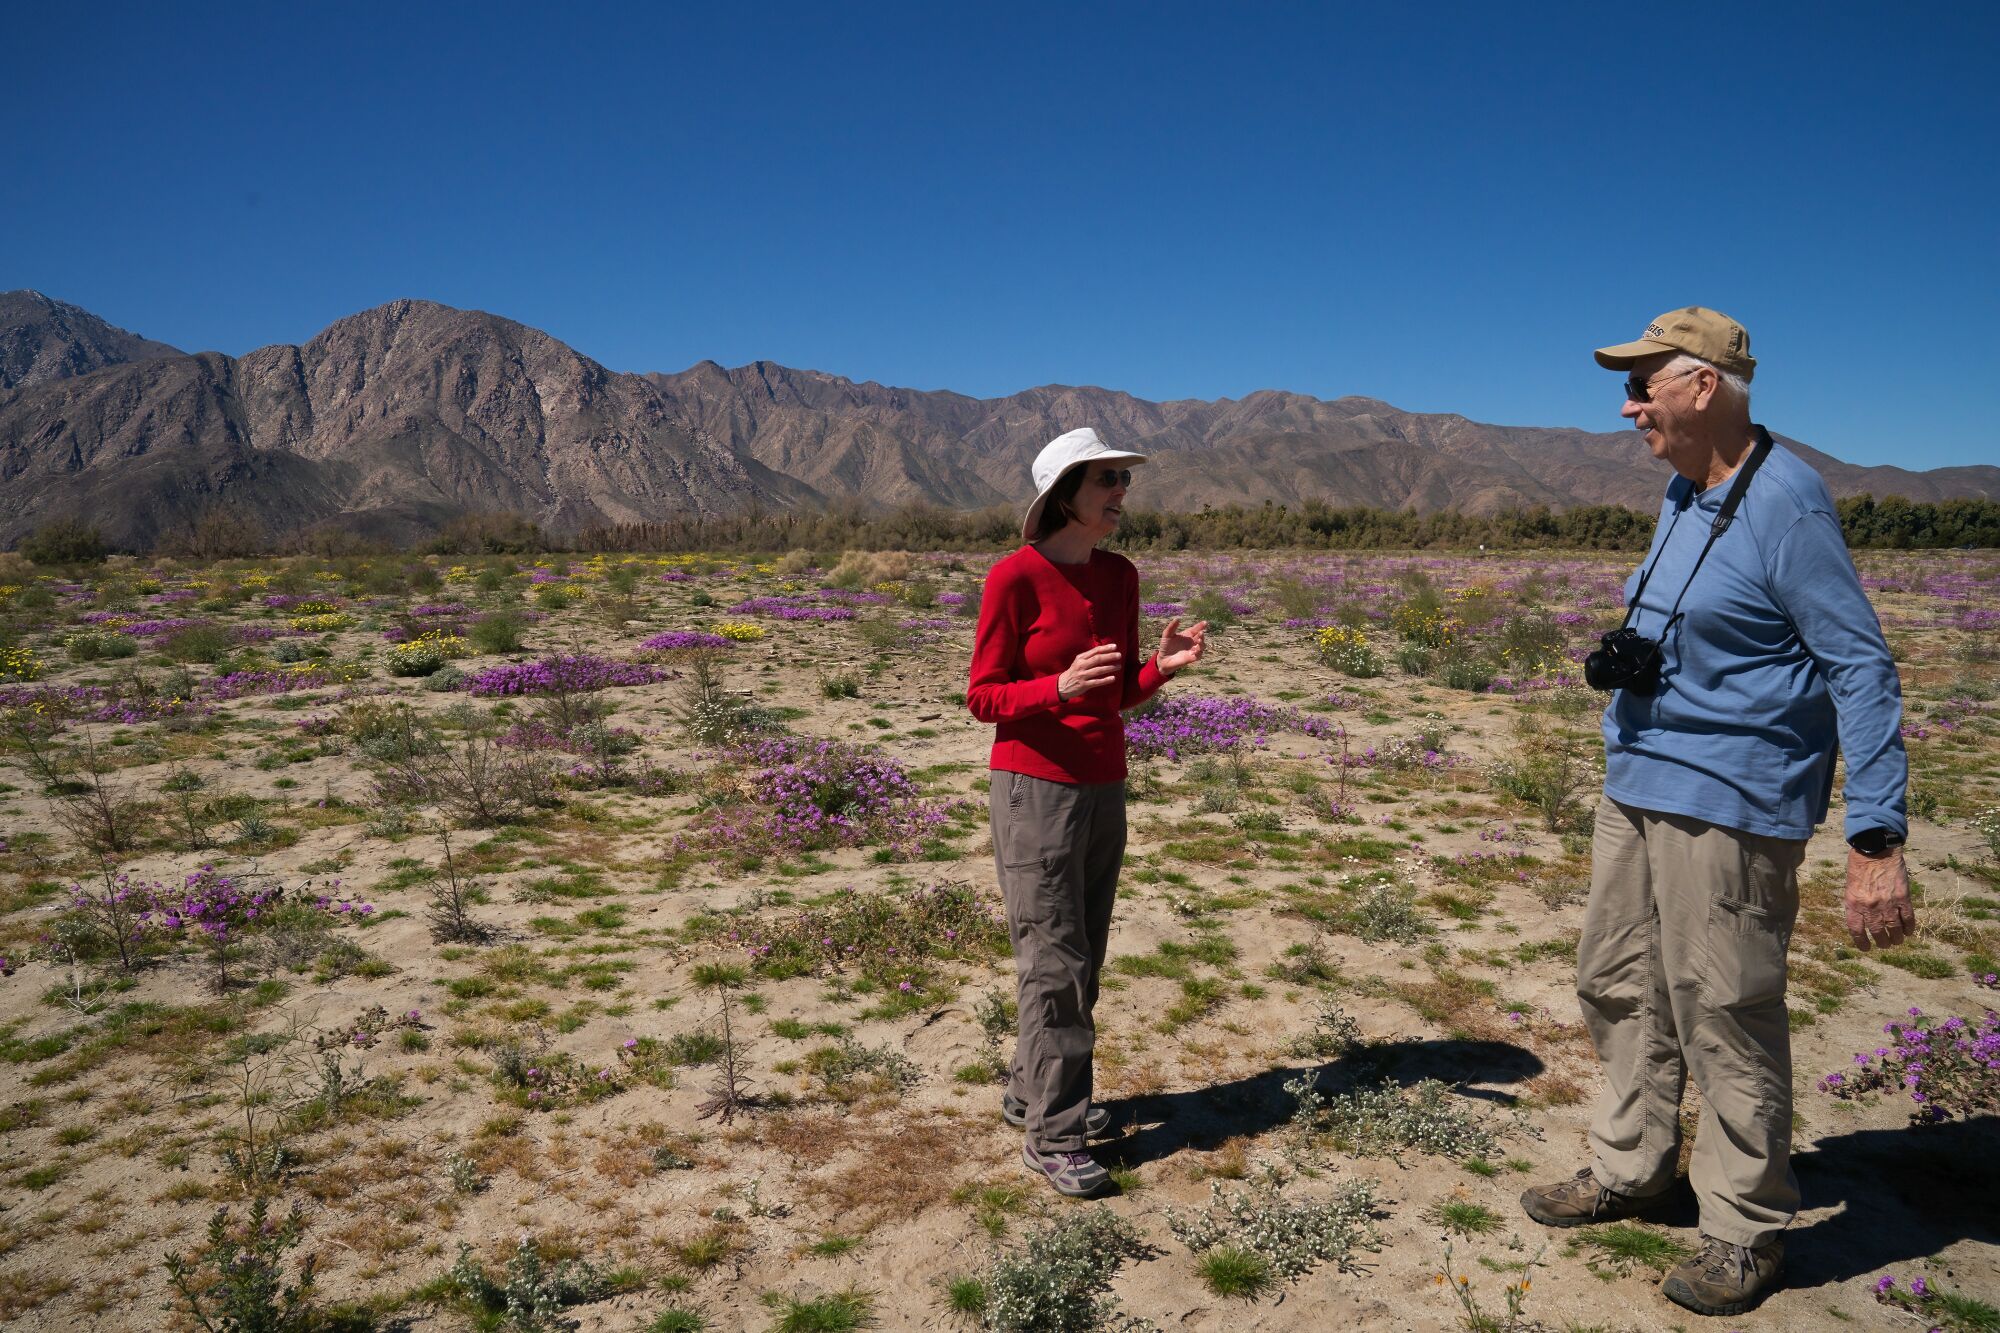 Millicent and John Price walk in an open field at Anza-Borrego Desert State Park.